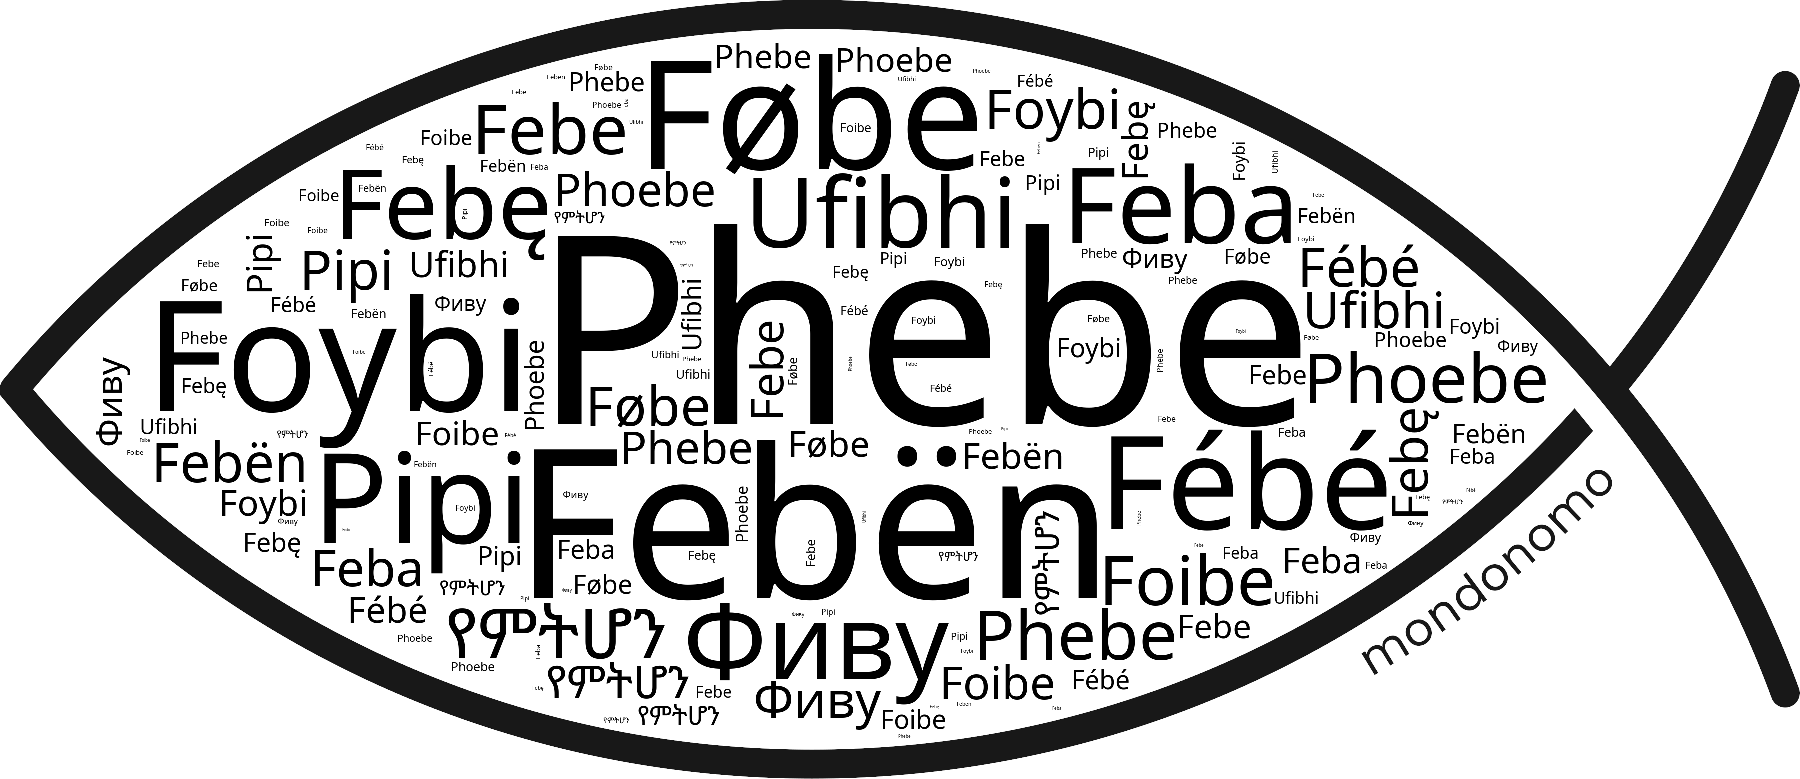 Name Phebe in the world's Bibles